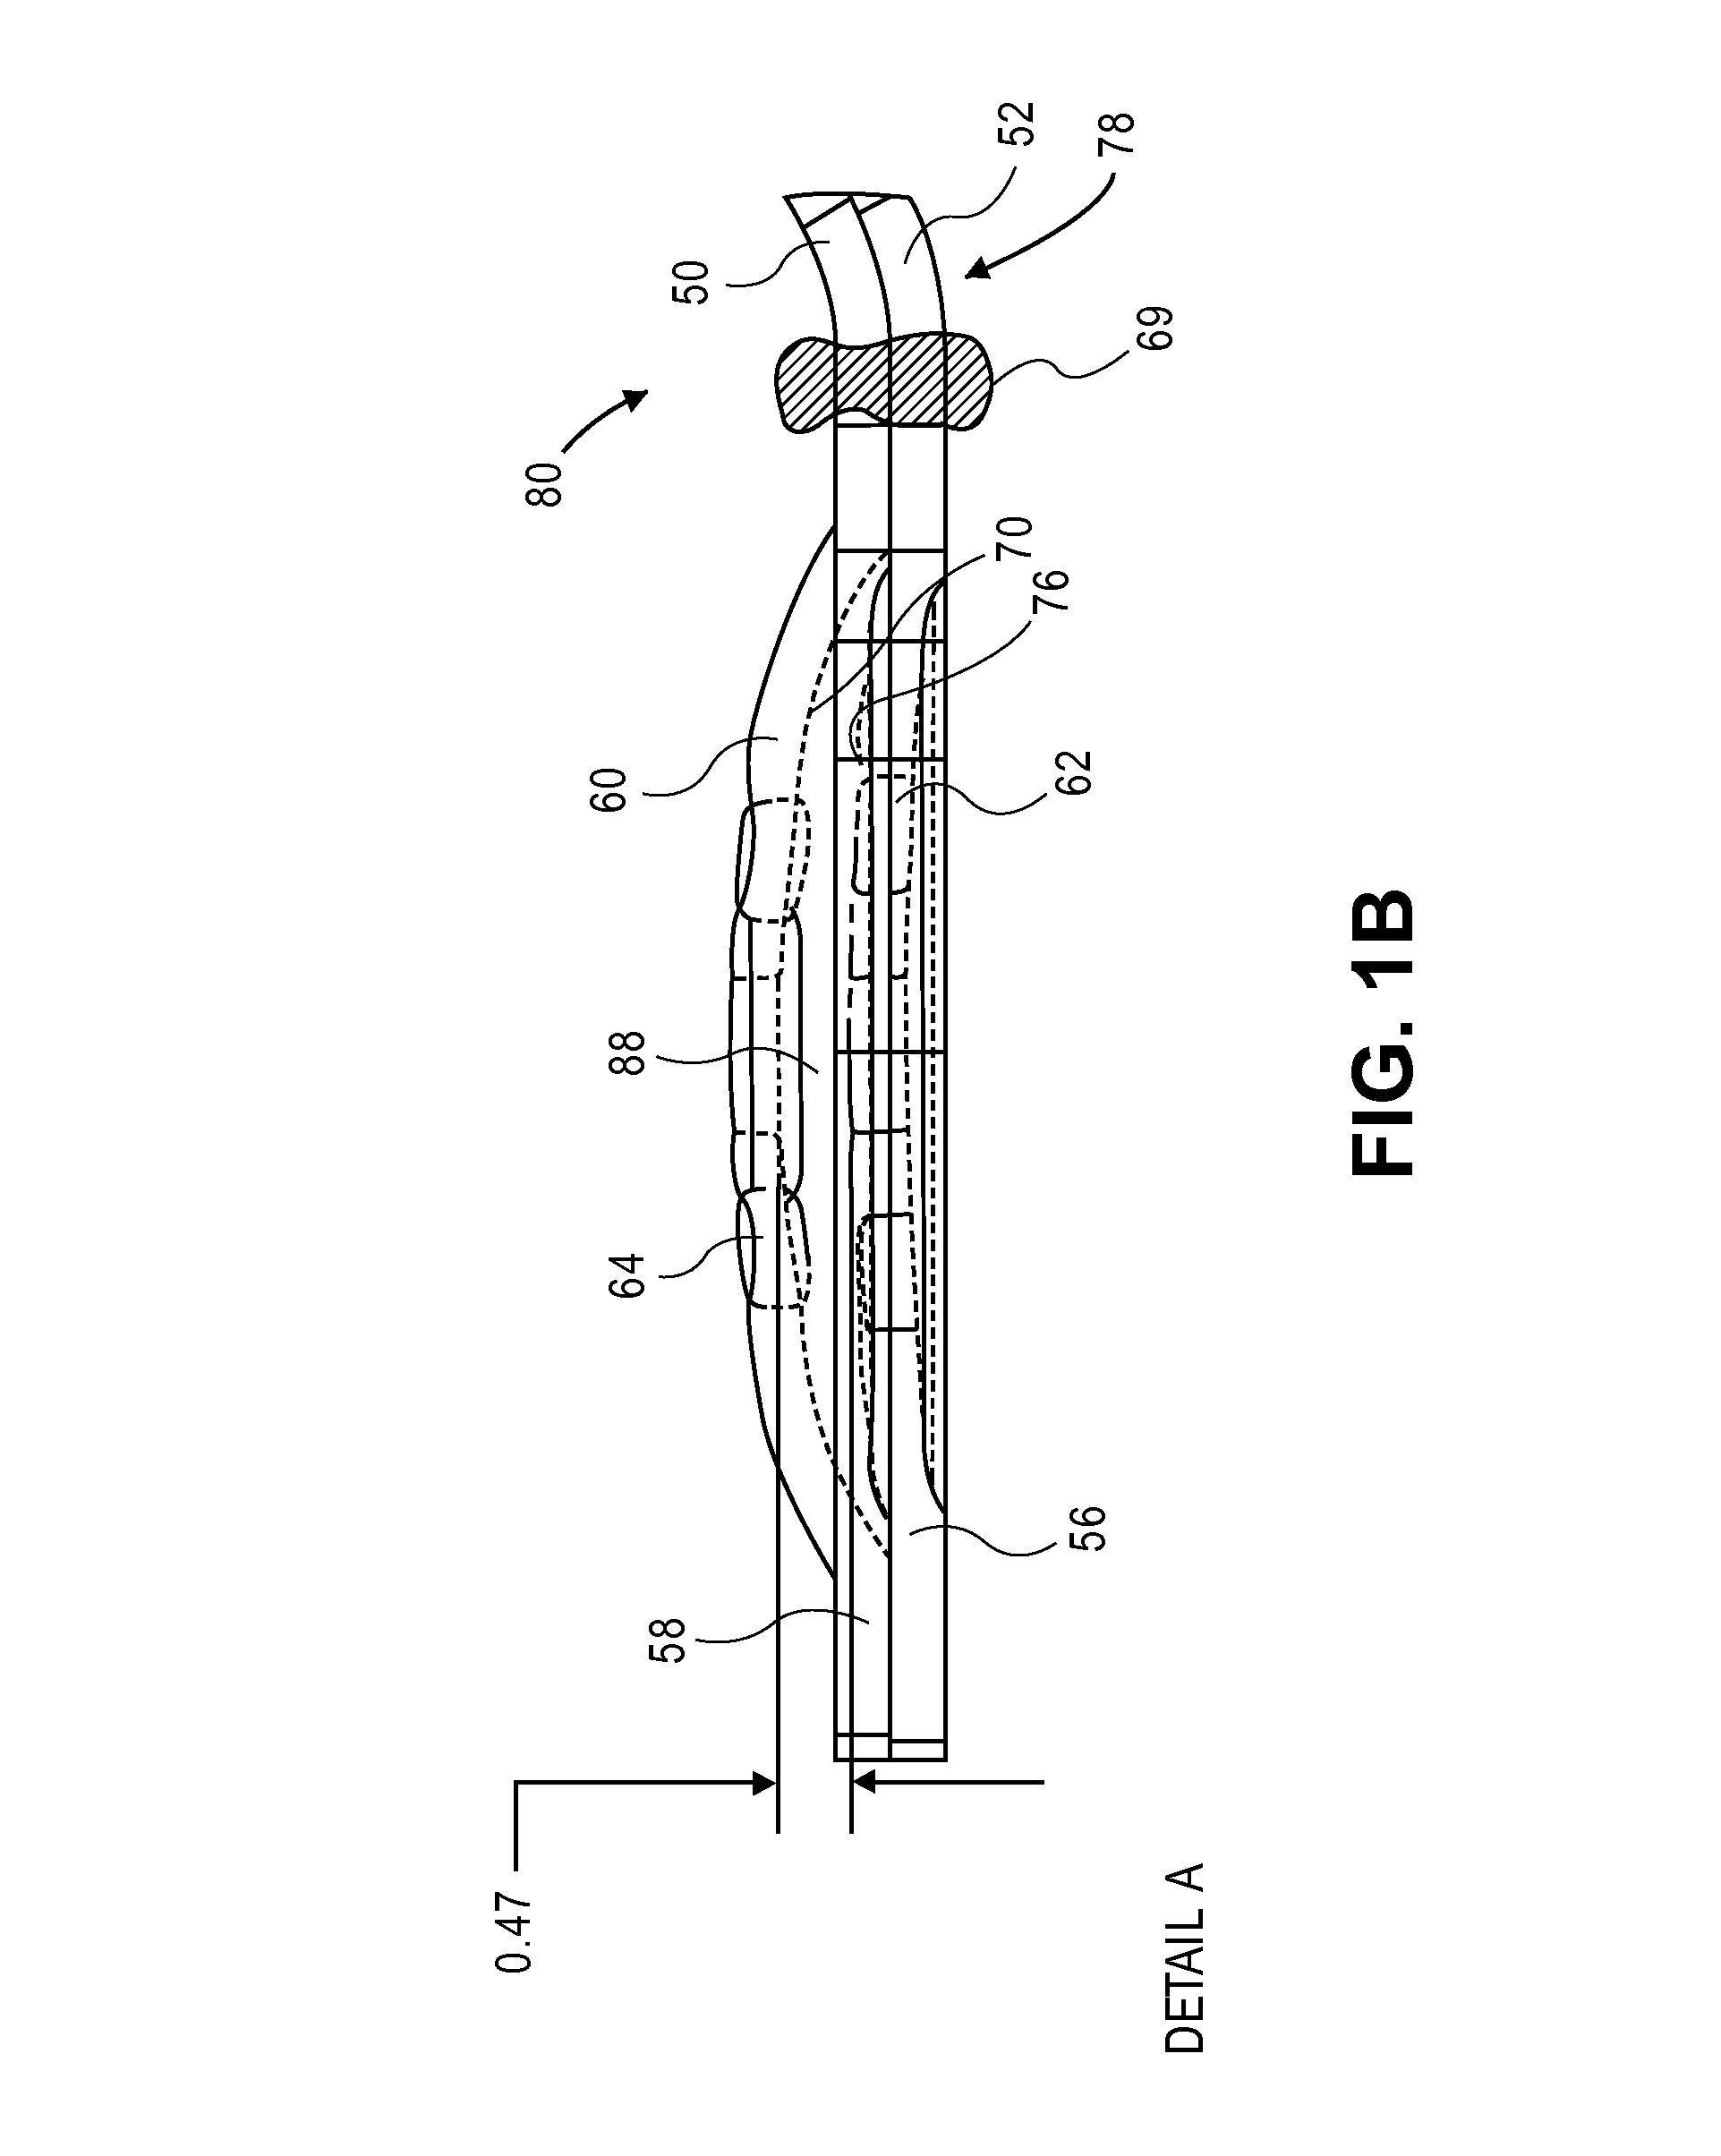 Corneal implant storage and delivery devices